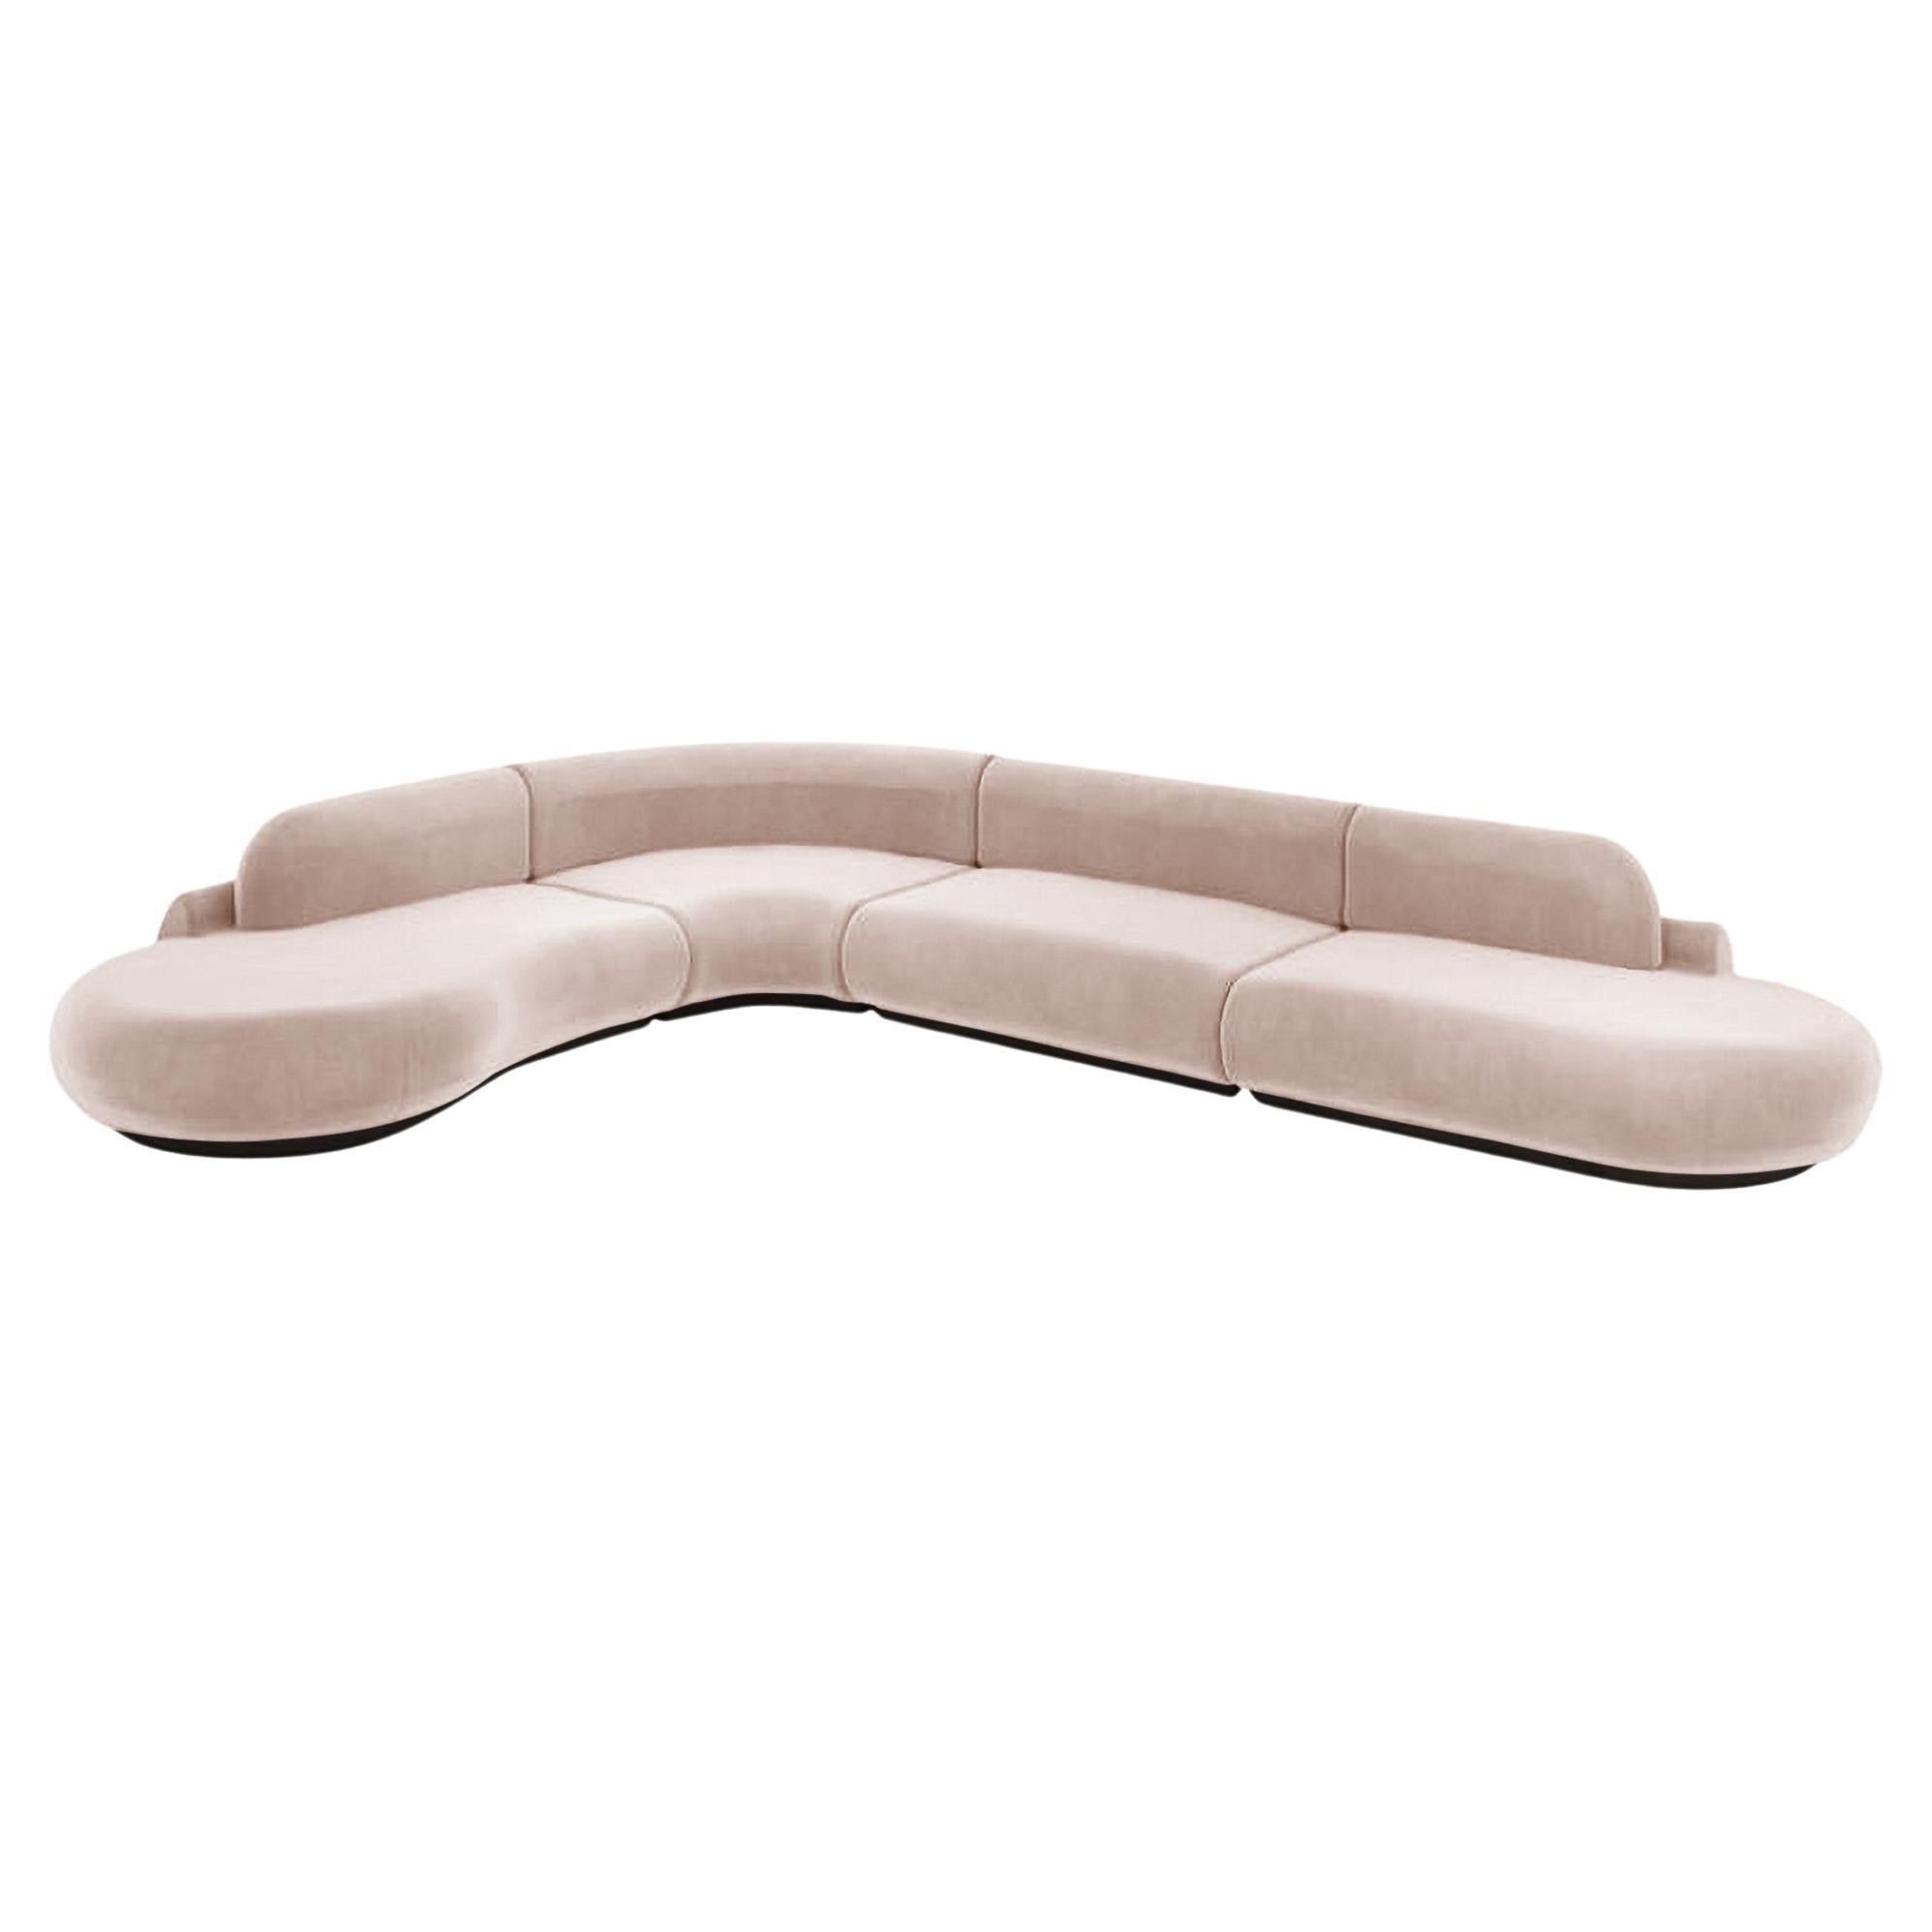 Naked Sectional Sofa, 4 Piece with Beech Ash-056-5 and Vigo Blossom For Sale